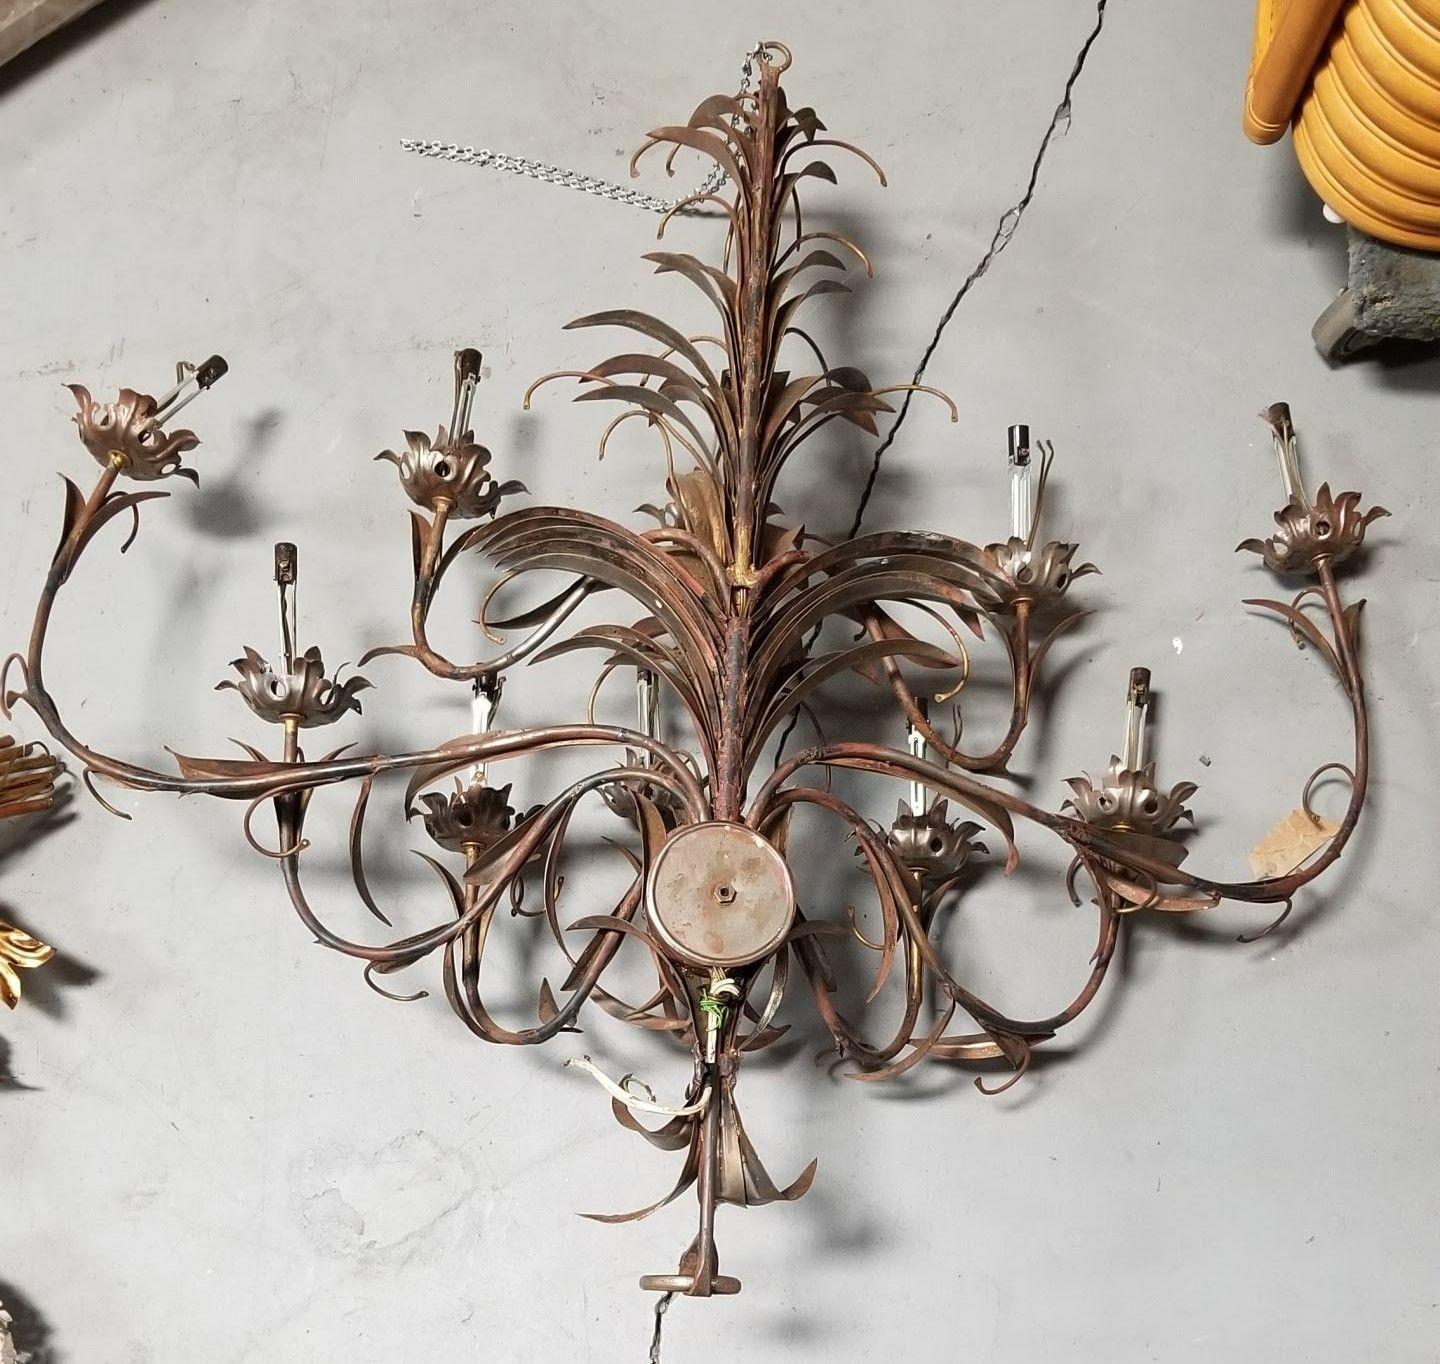 1950s Italian Hollywood Regency-styled wall candelabra centerpiece sculpture.

Cords have been cut, this piece is for decoration only.

A stunning Italian ornate sconce, a true vintage gem from the mid-century era. This exquisite piece features